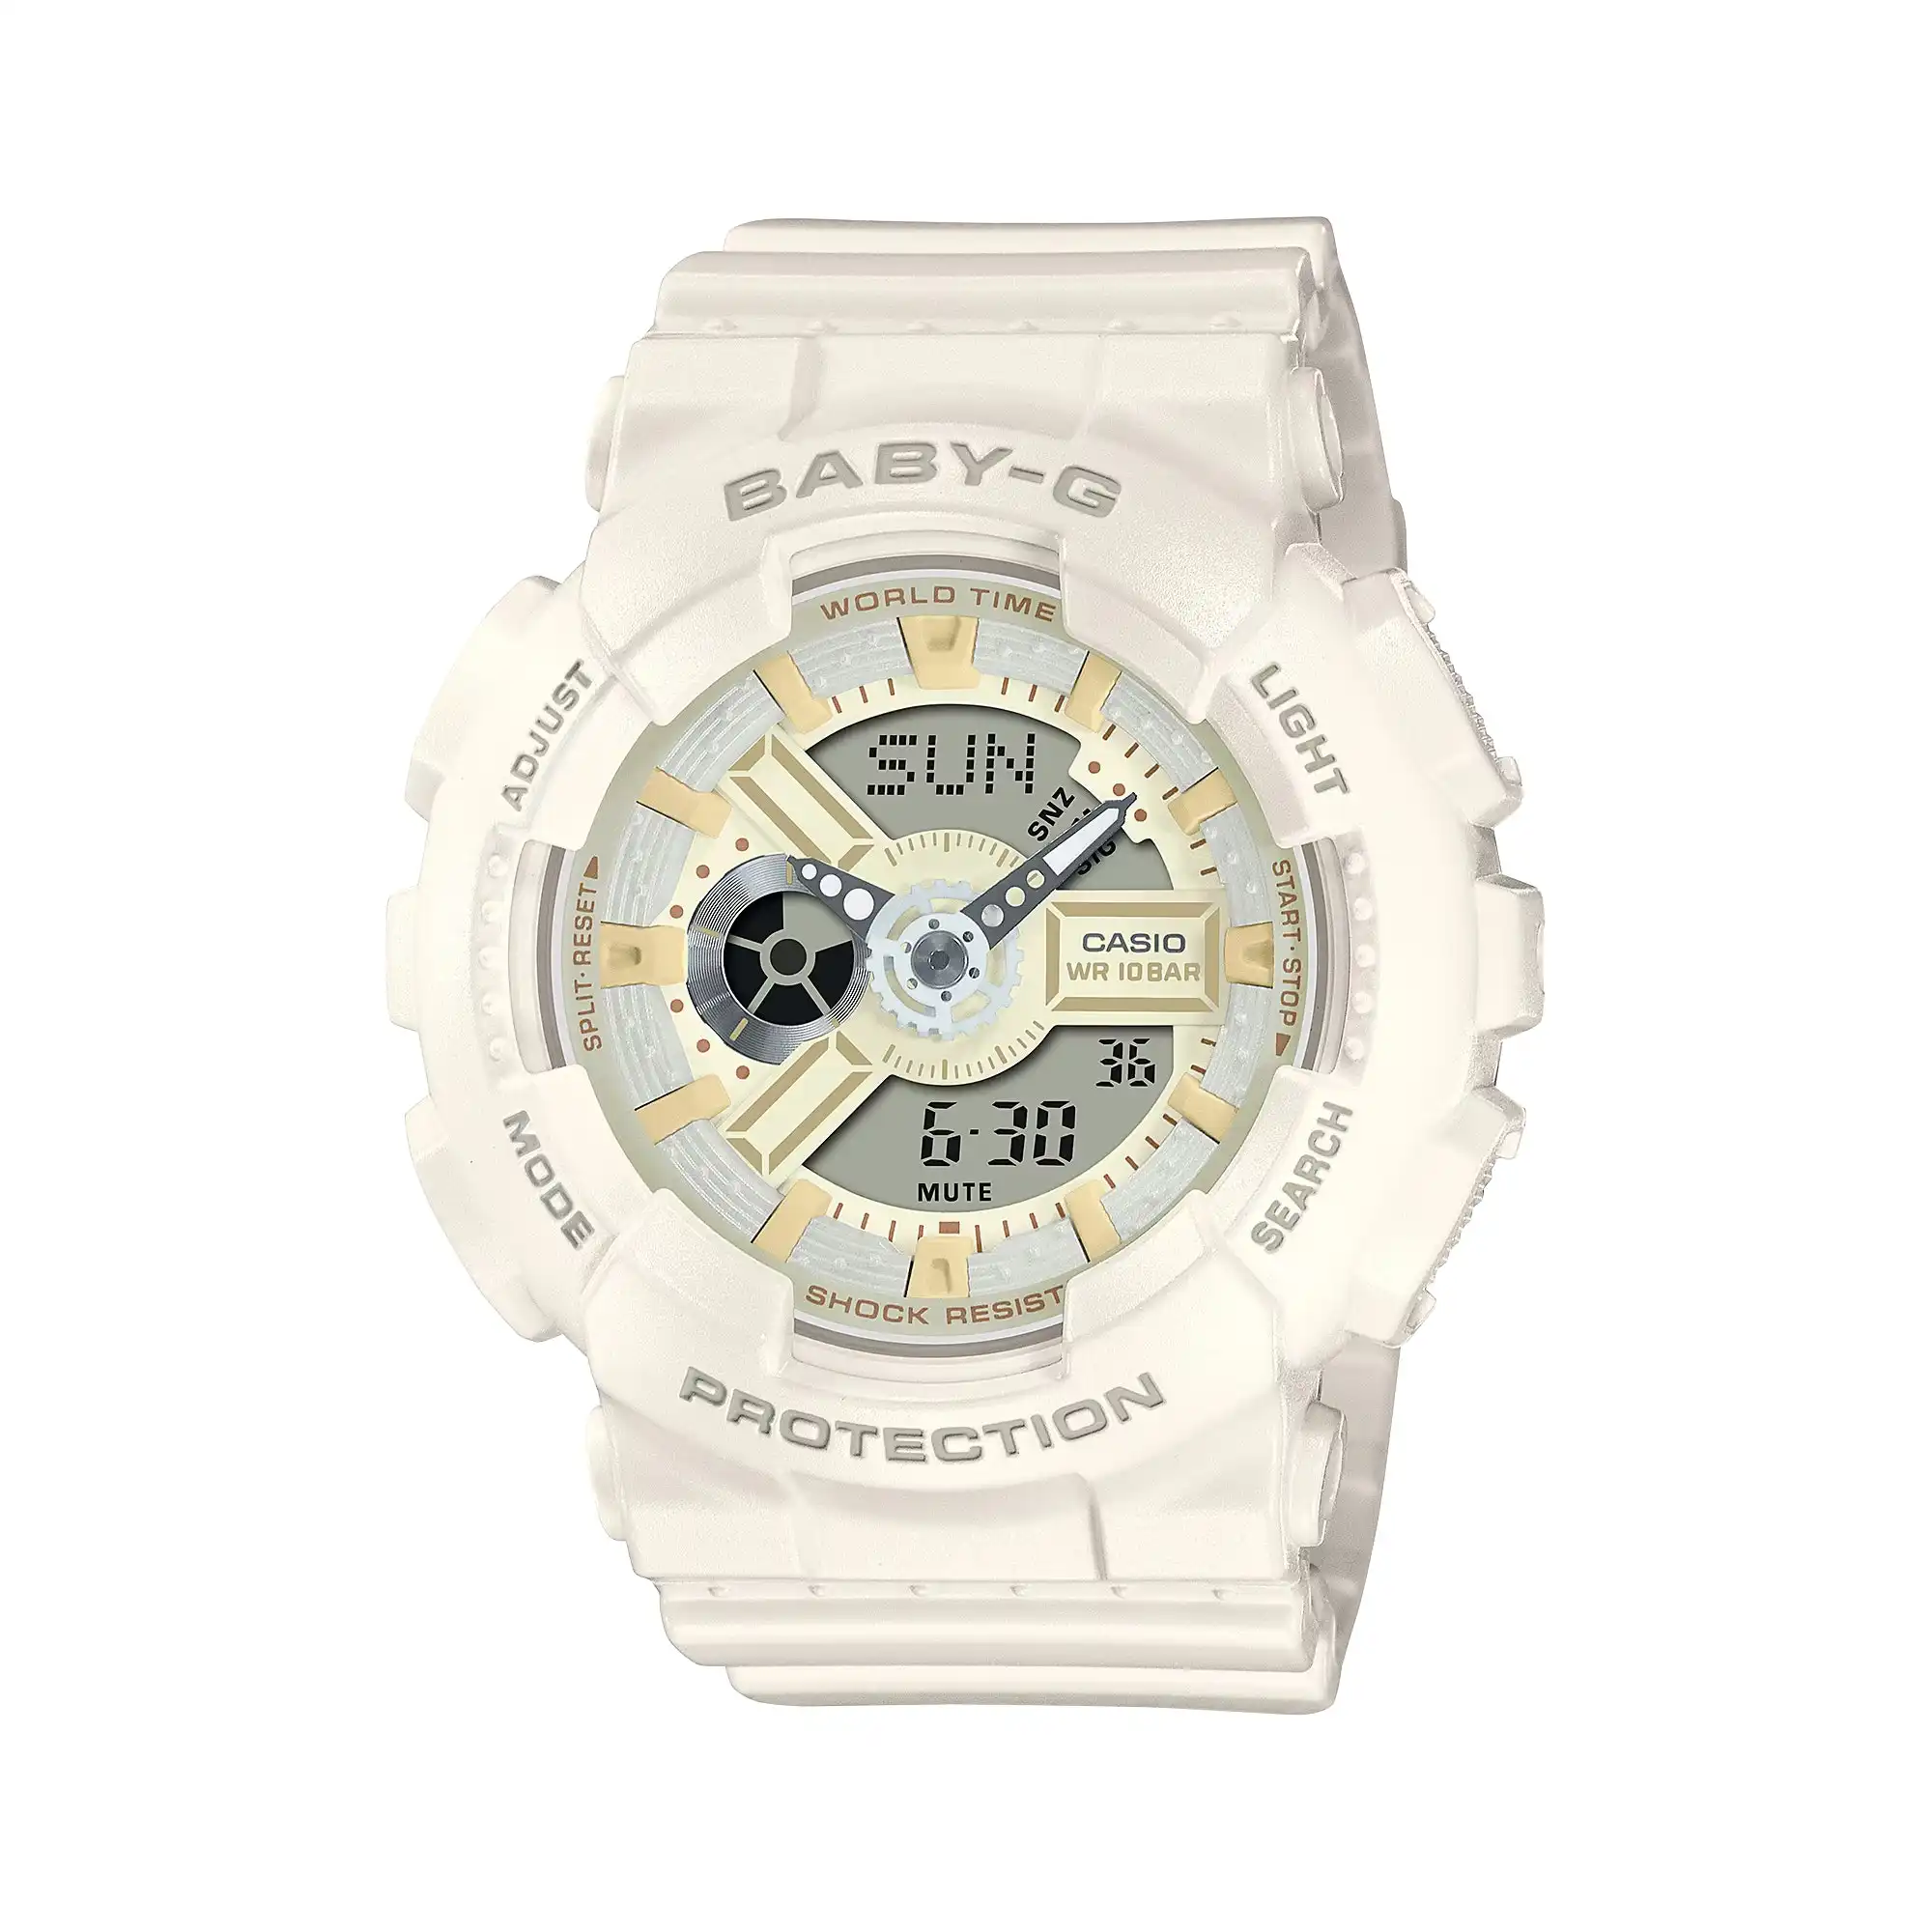 Baby G Digital & Analogue Watch Sweets Collection BA110XSW-7A